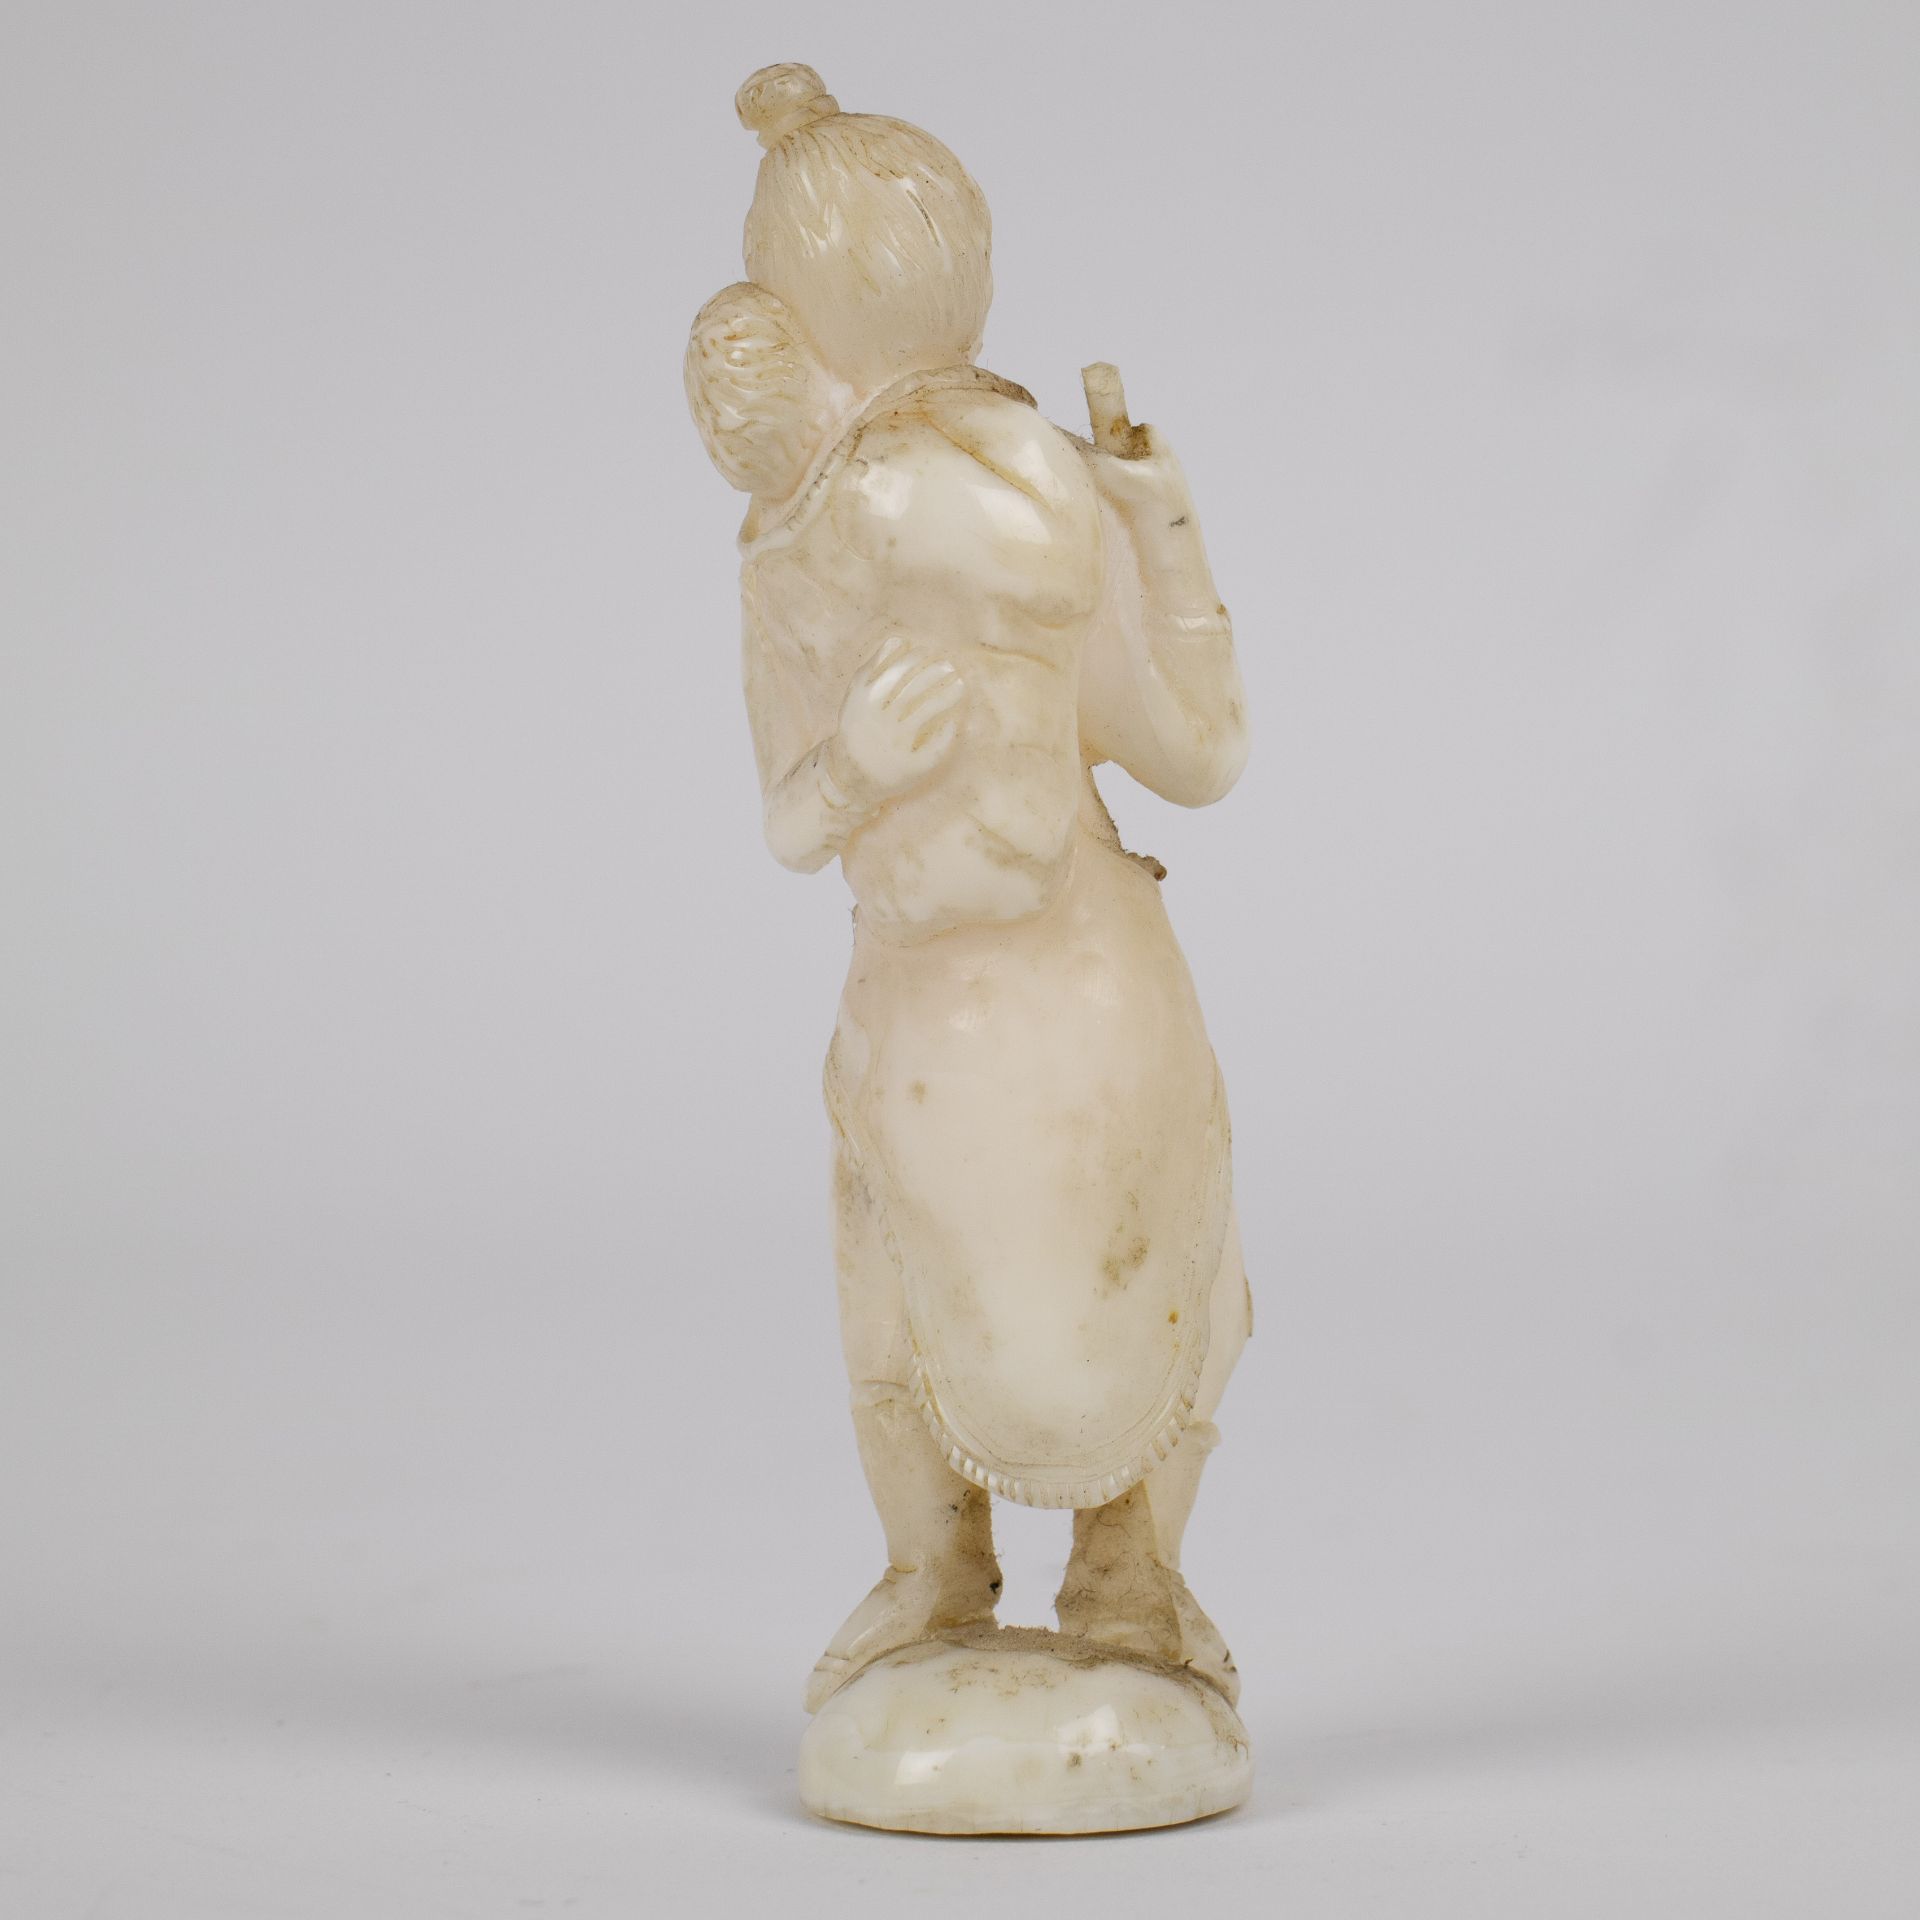 Marine ivory sculpture of a woman carrying a child on her back, Greenland, early 20th century. - Image 3 of 4